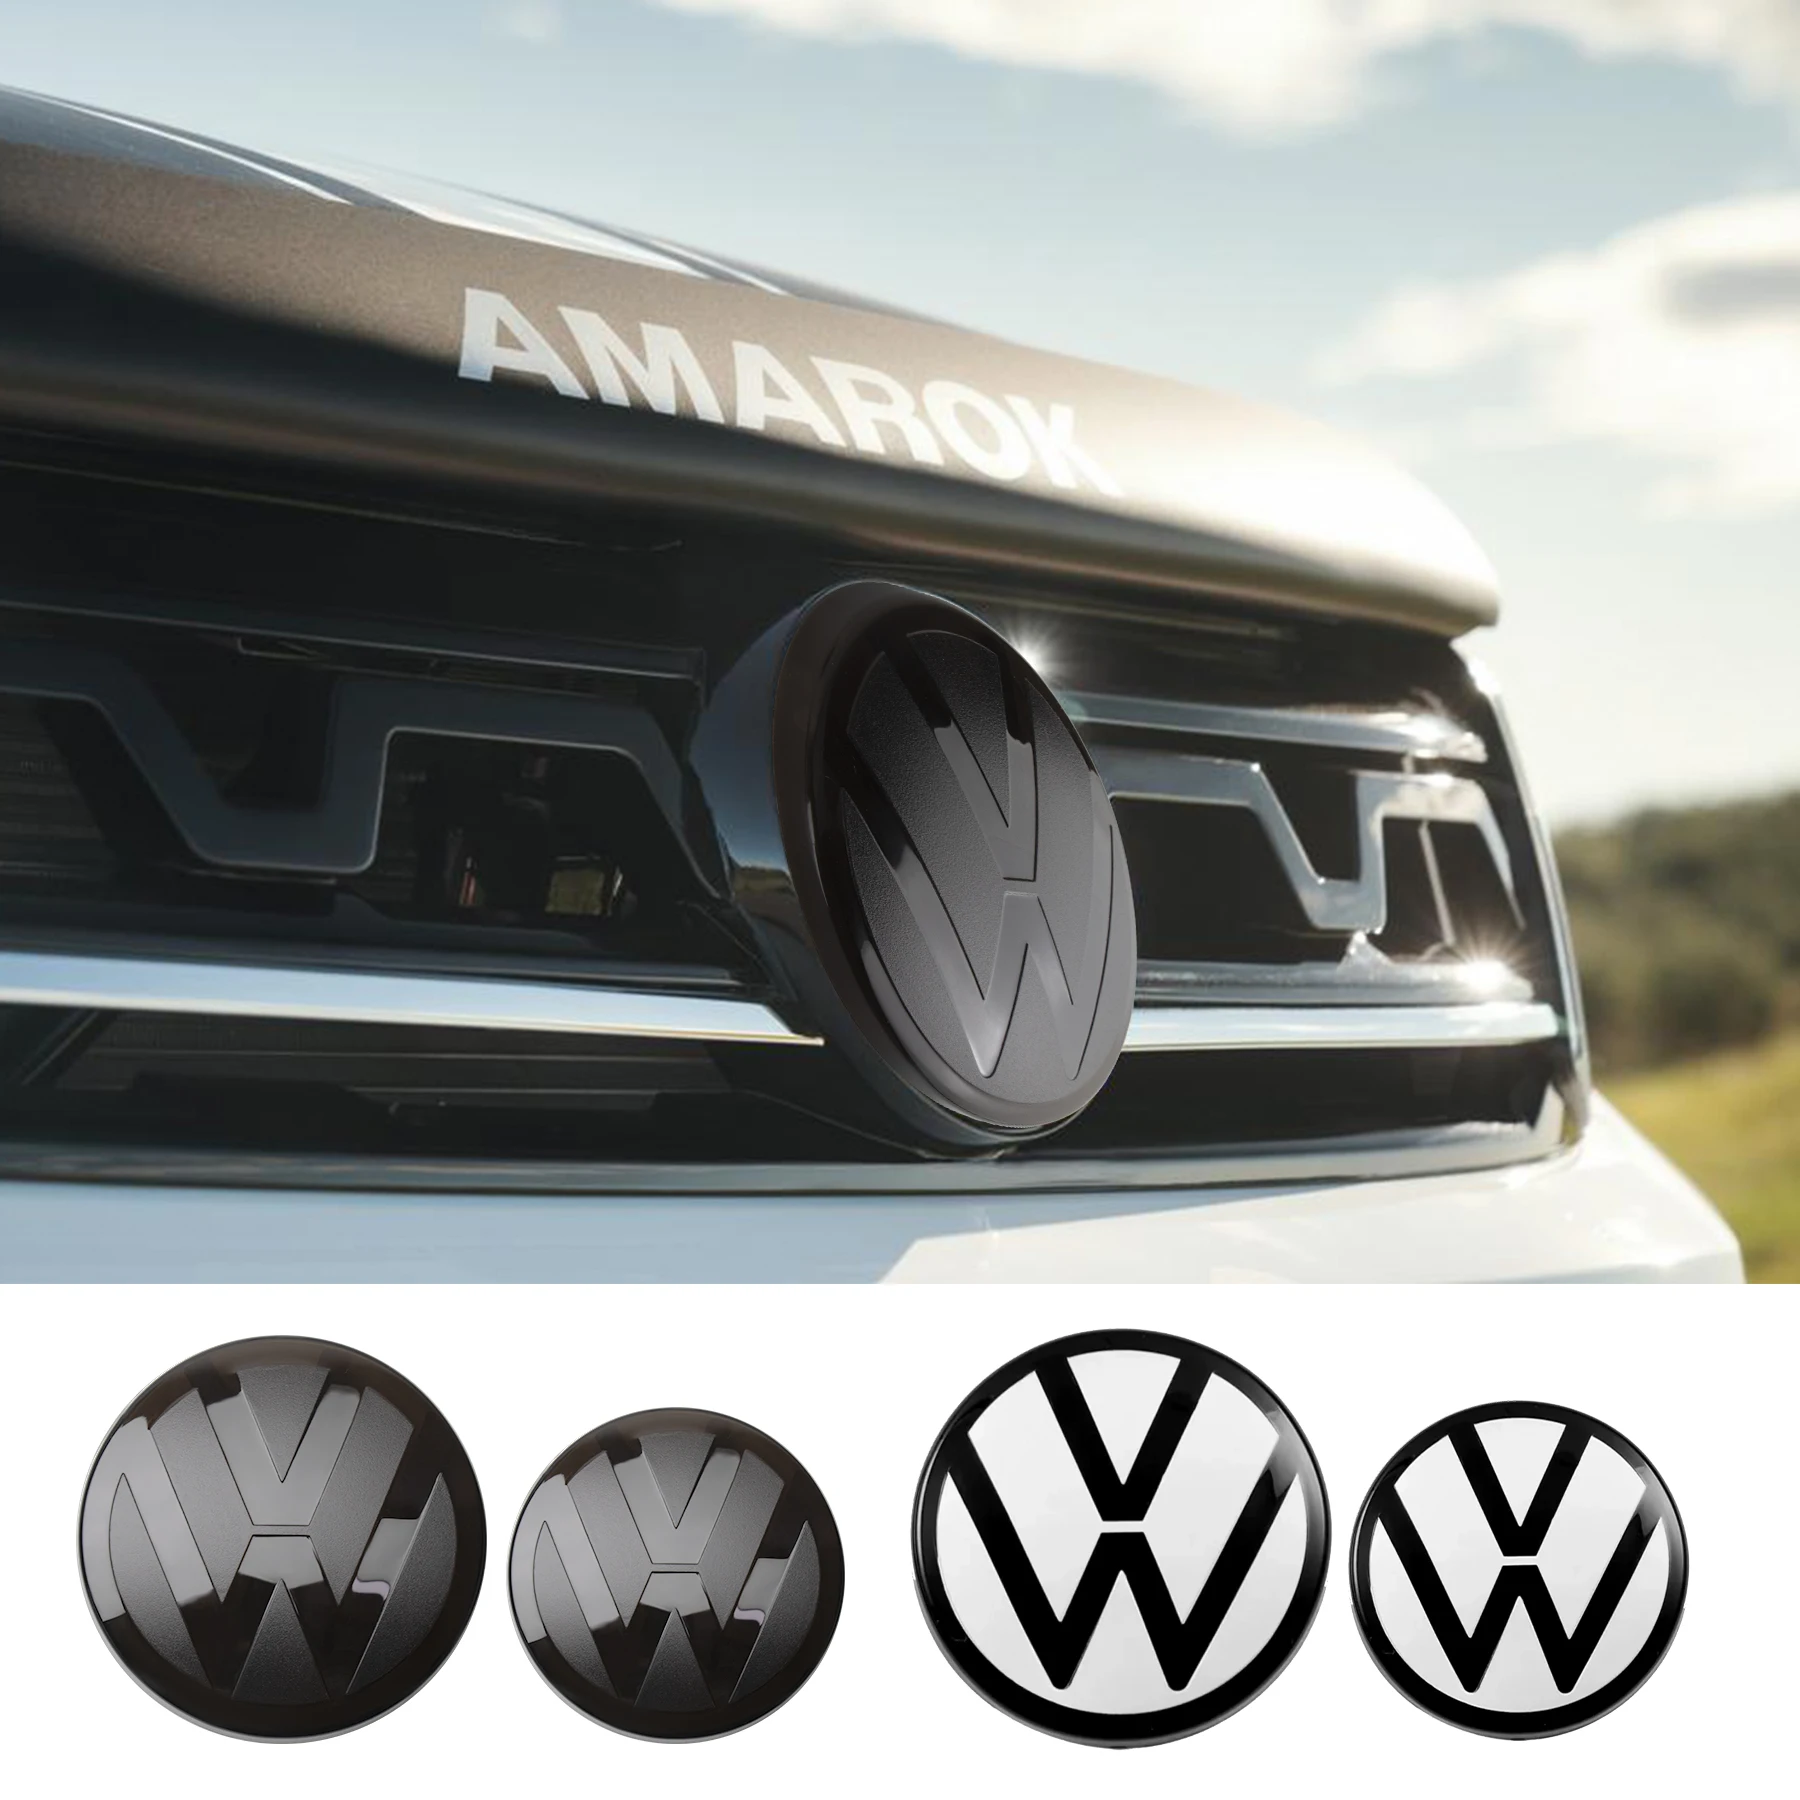 

1set Car Front Grill Badges Rear Trunk Emblem Lid Covers Logo Sticker Black white For VW Golf 6 7 7.5 8 VARIANT Auto Accessories